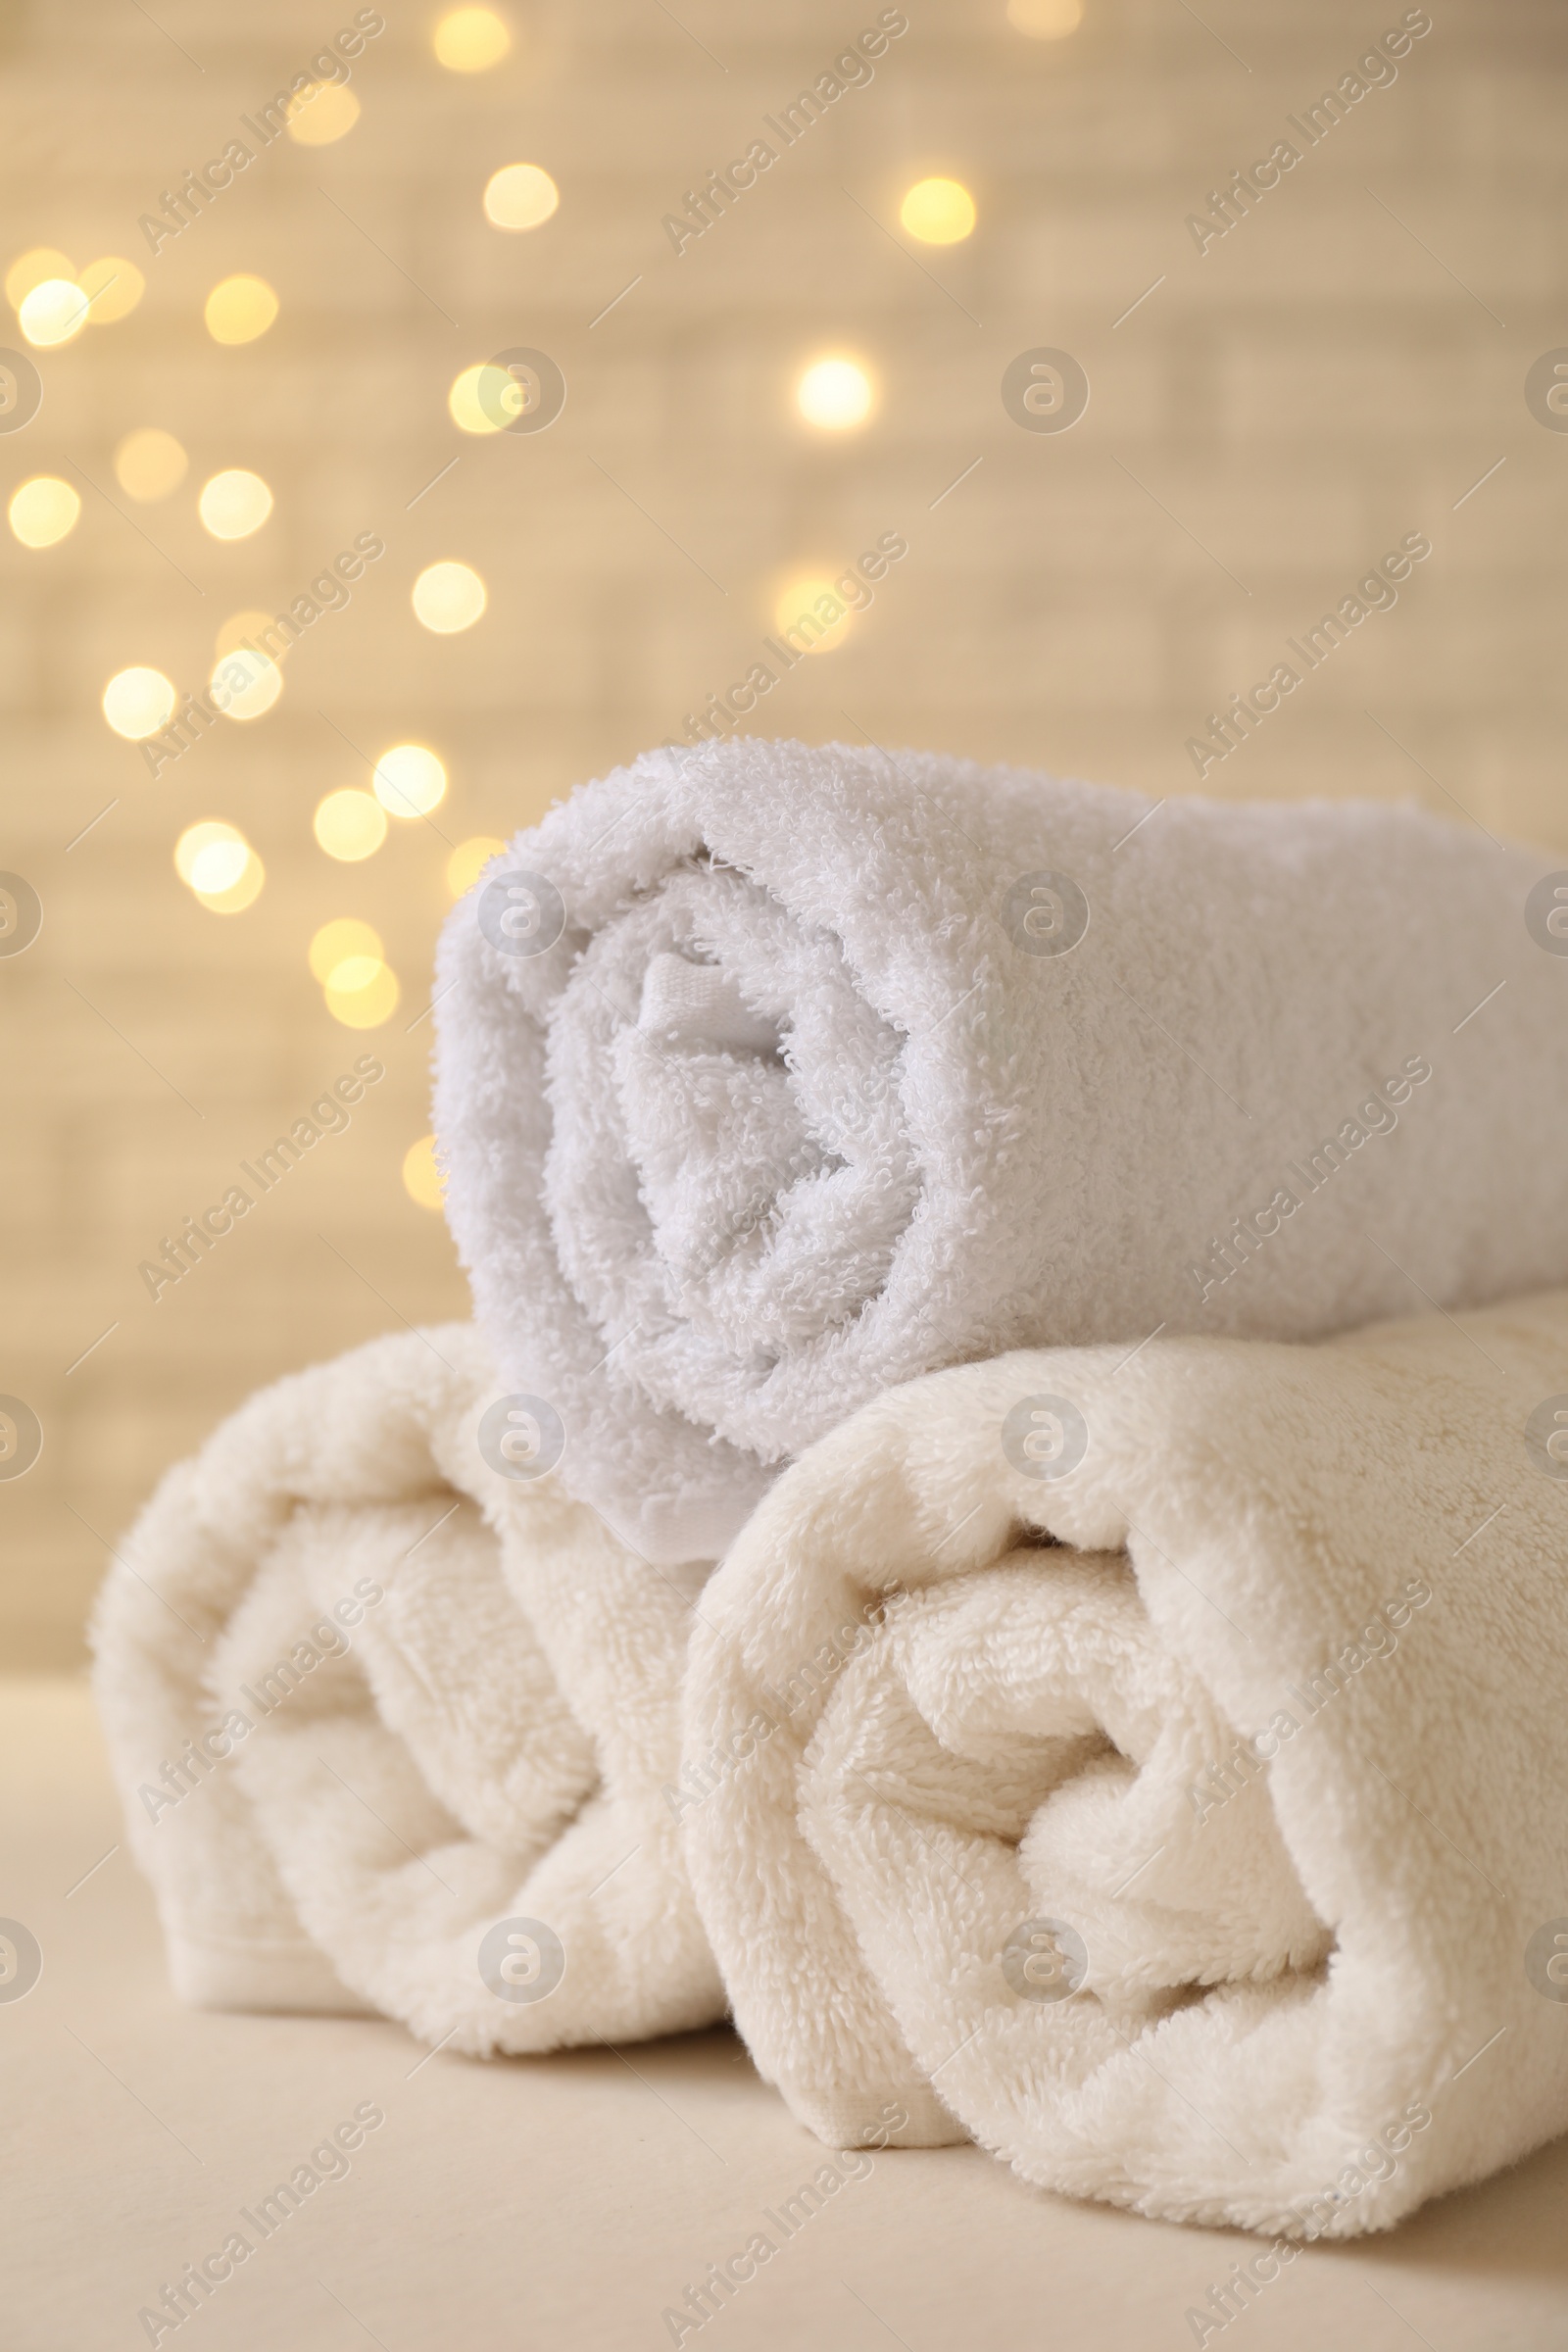 Photo of Rolled terry towels on white table near brick wall indoors